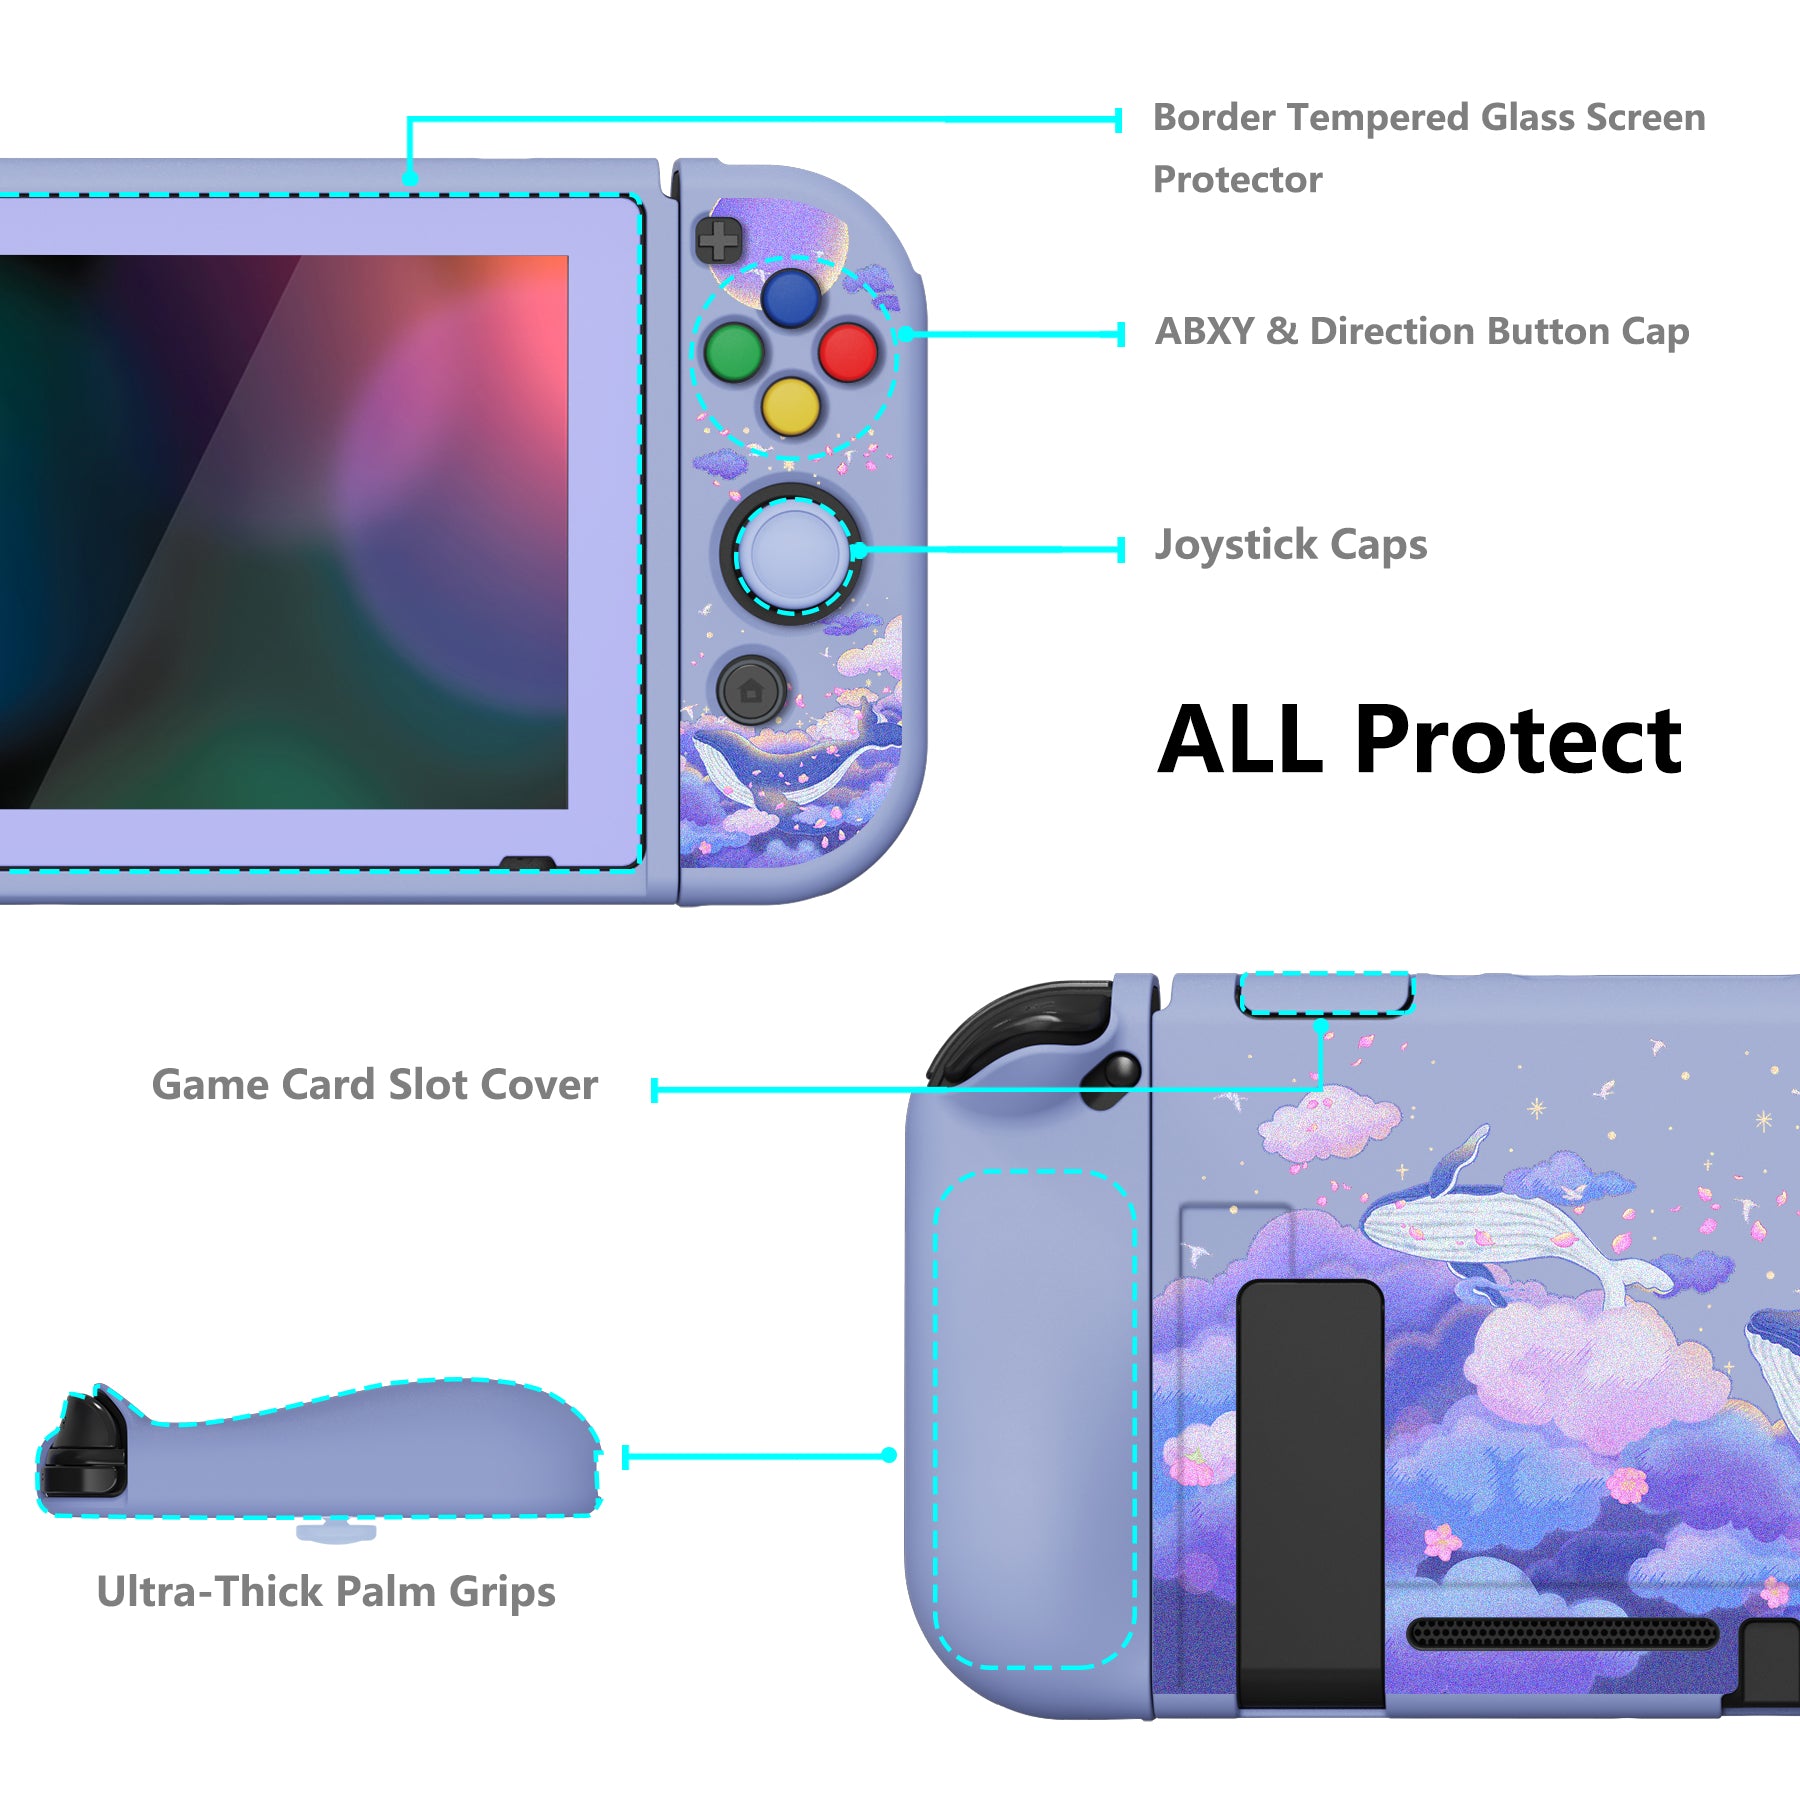 PlayVital ZealProtect Soft Protective Case for Nintendo Switch, Flexible Cover for Switch with Tempered Glass Screen Protector & Thumb Grips & ABXY Direction Button Caps - Whale in Dream - RNSYV6034 playvital